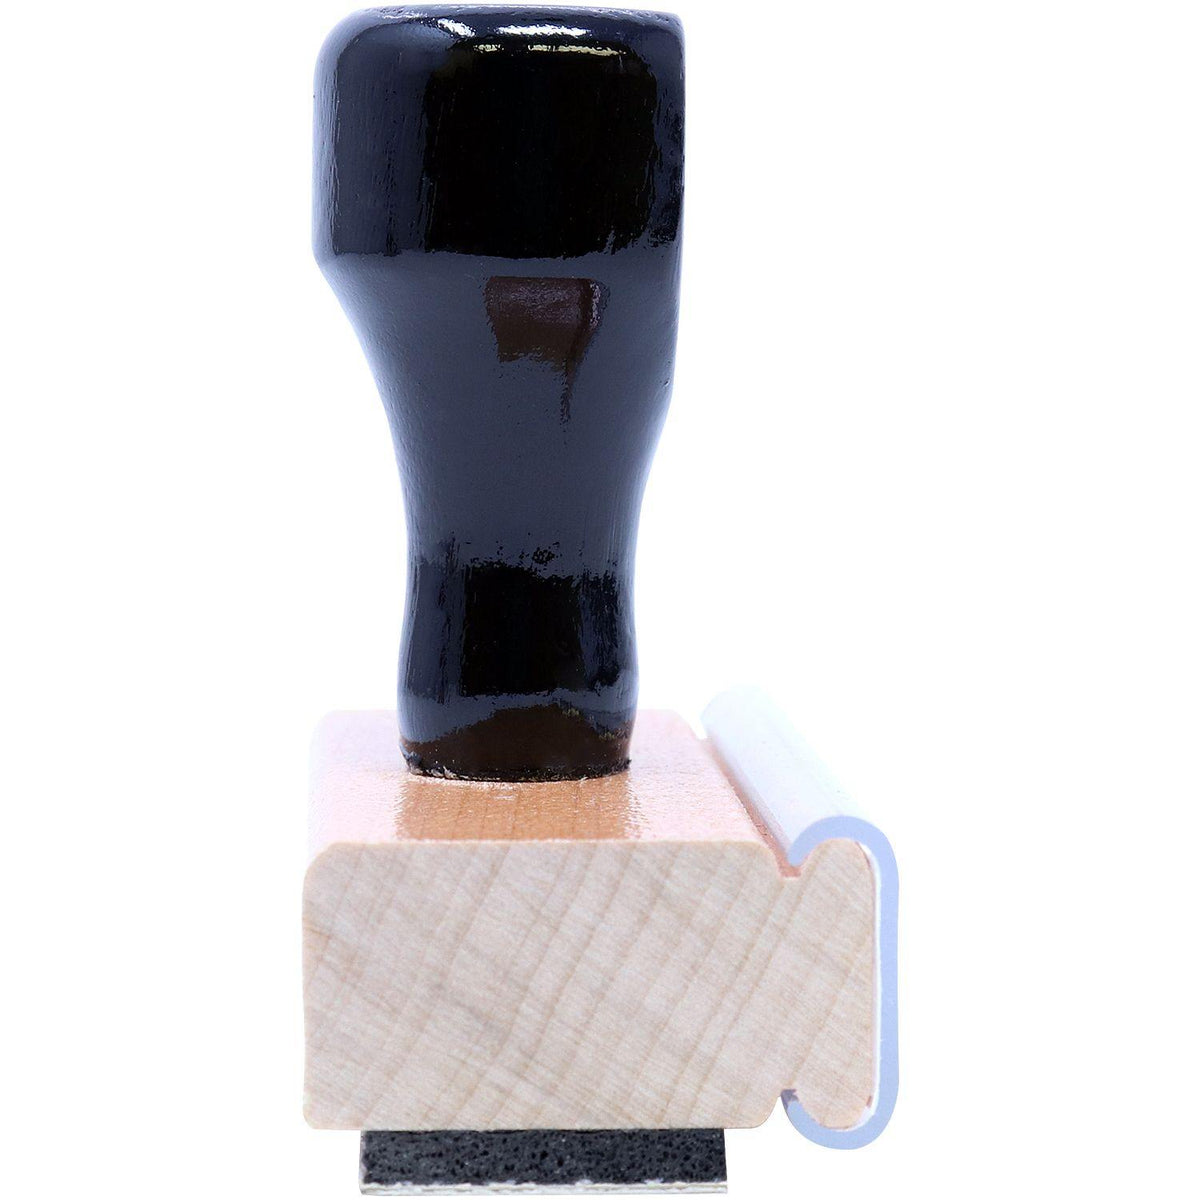 Side View of Appraisal Rubber Stamp